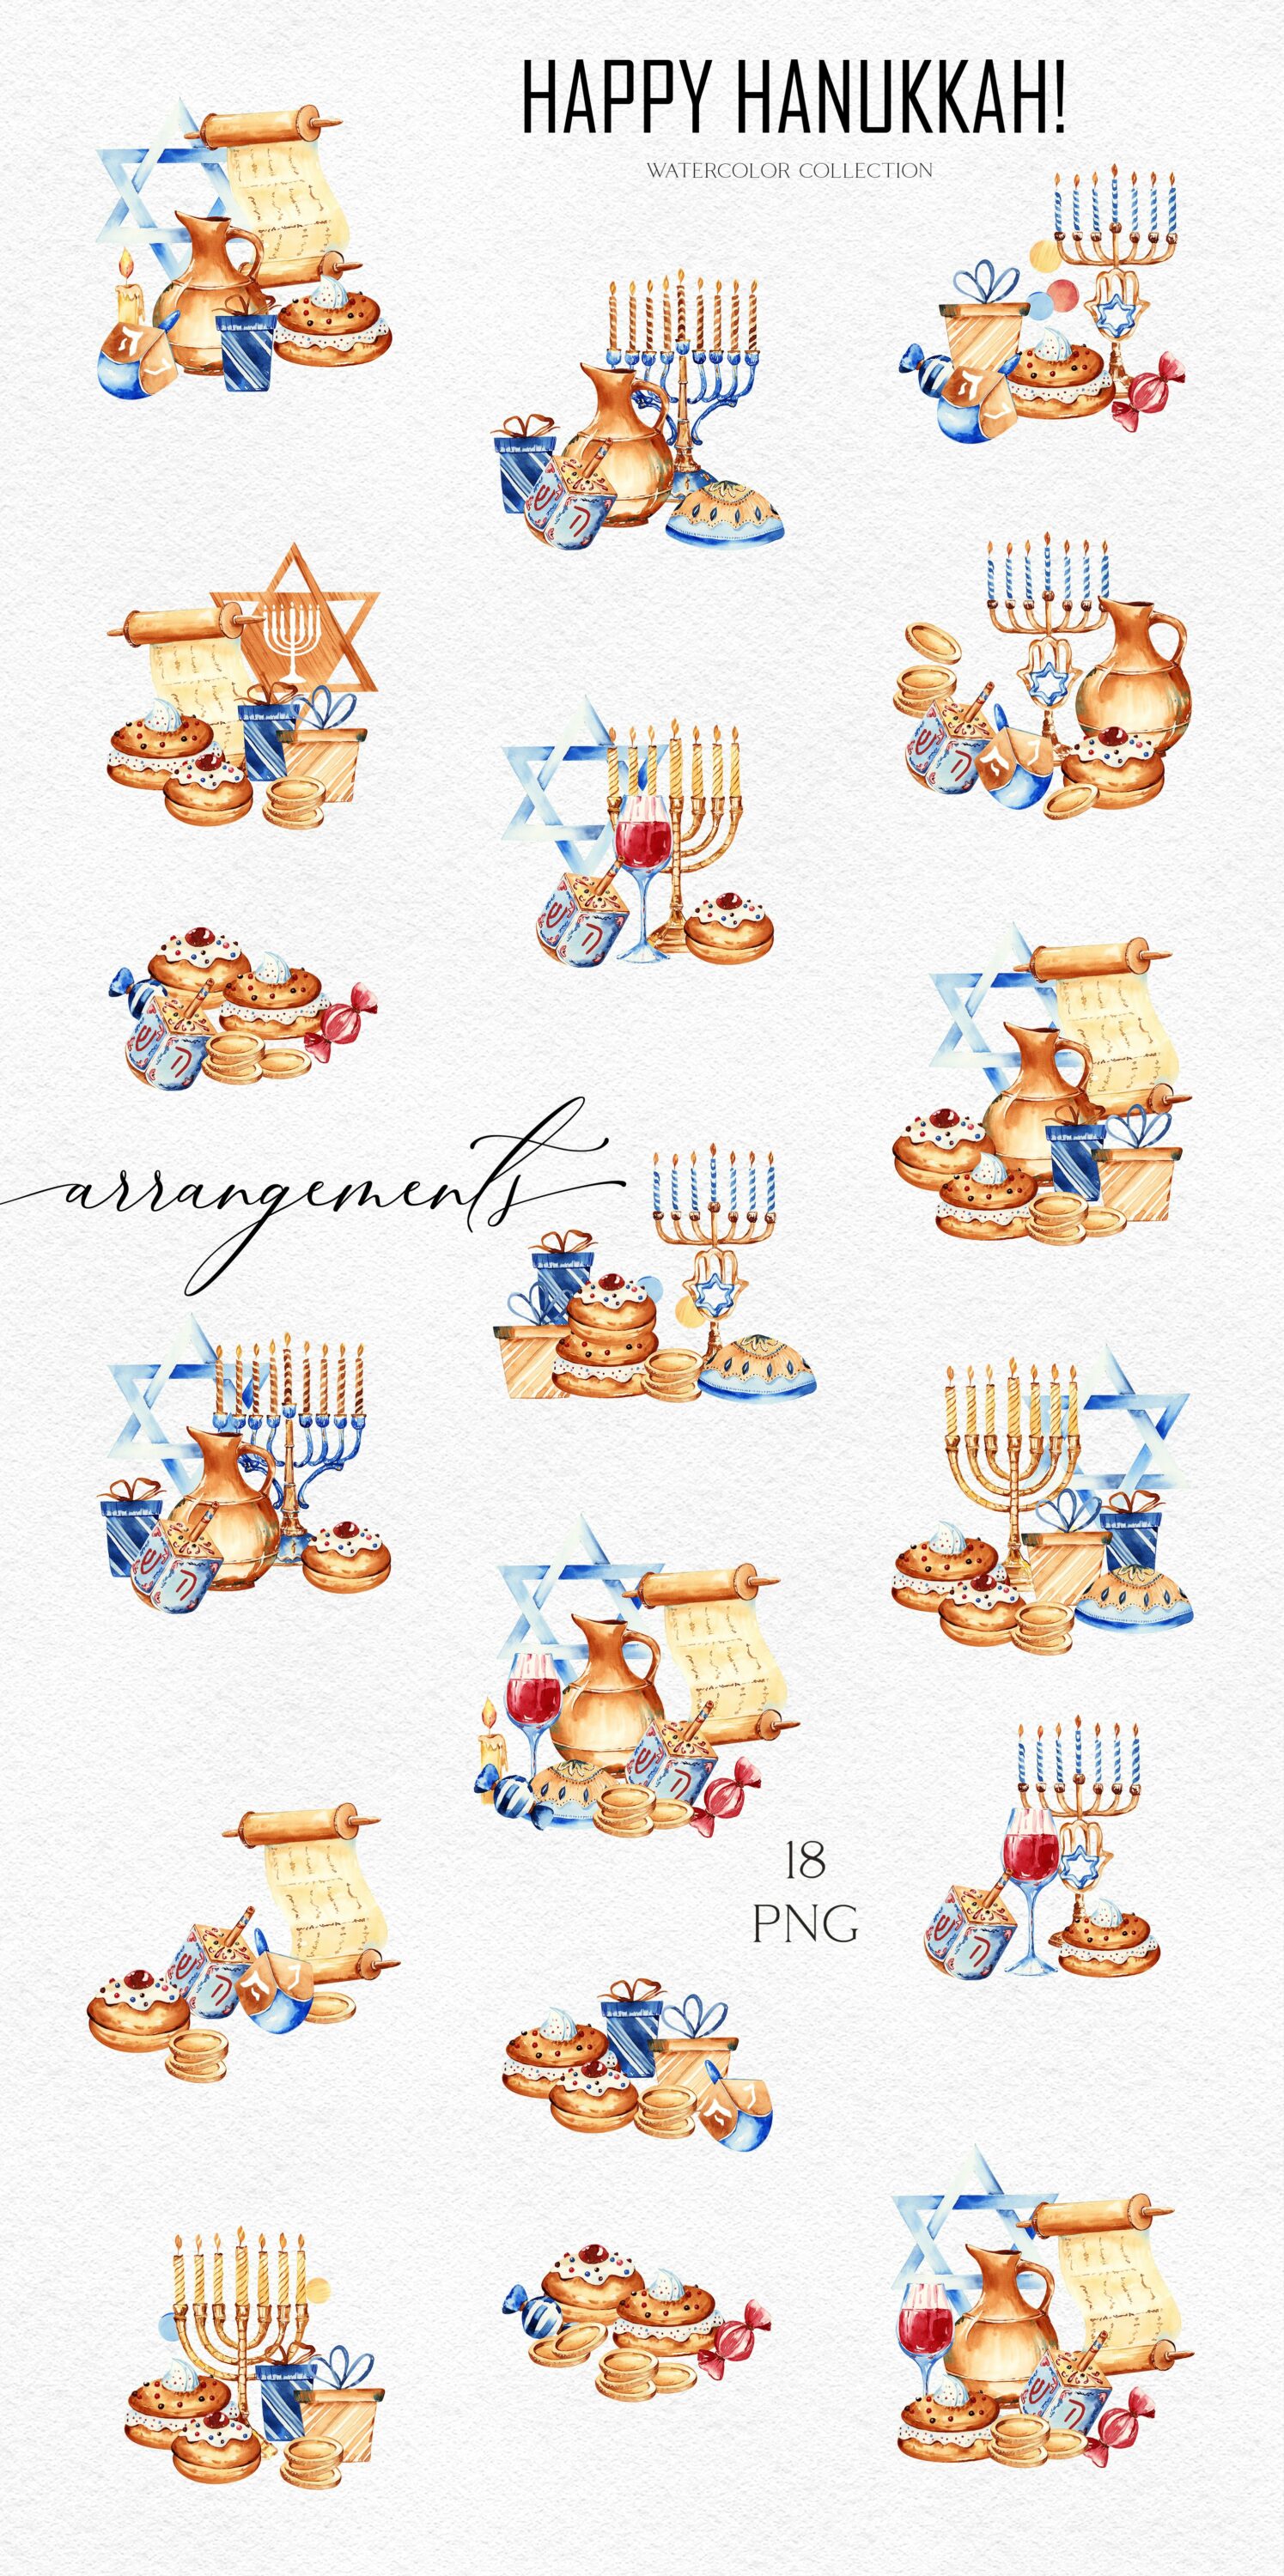 Images of things and objects for Hanukkah.